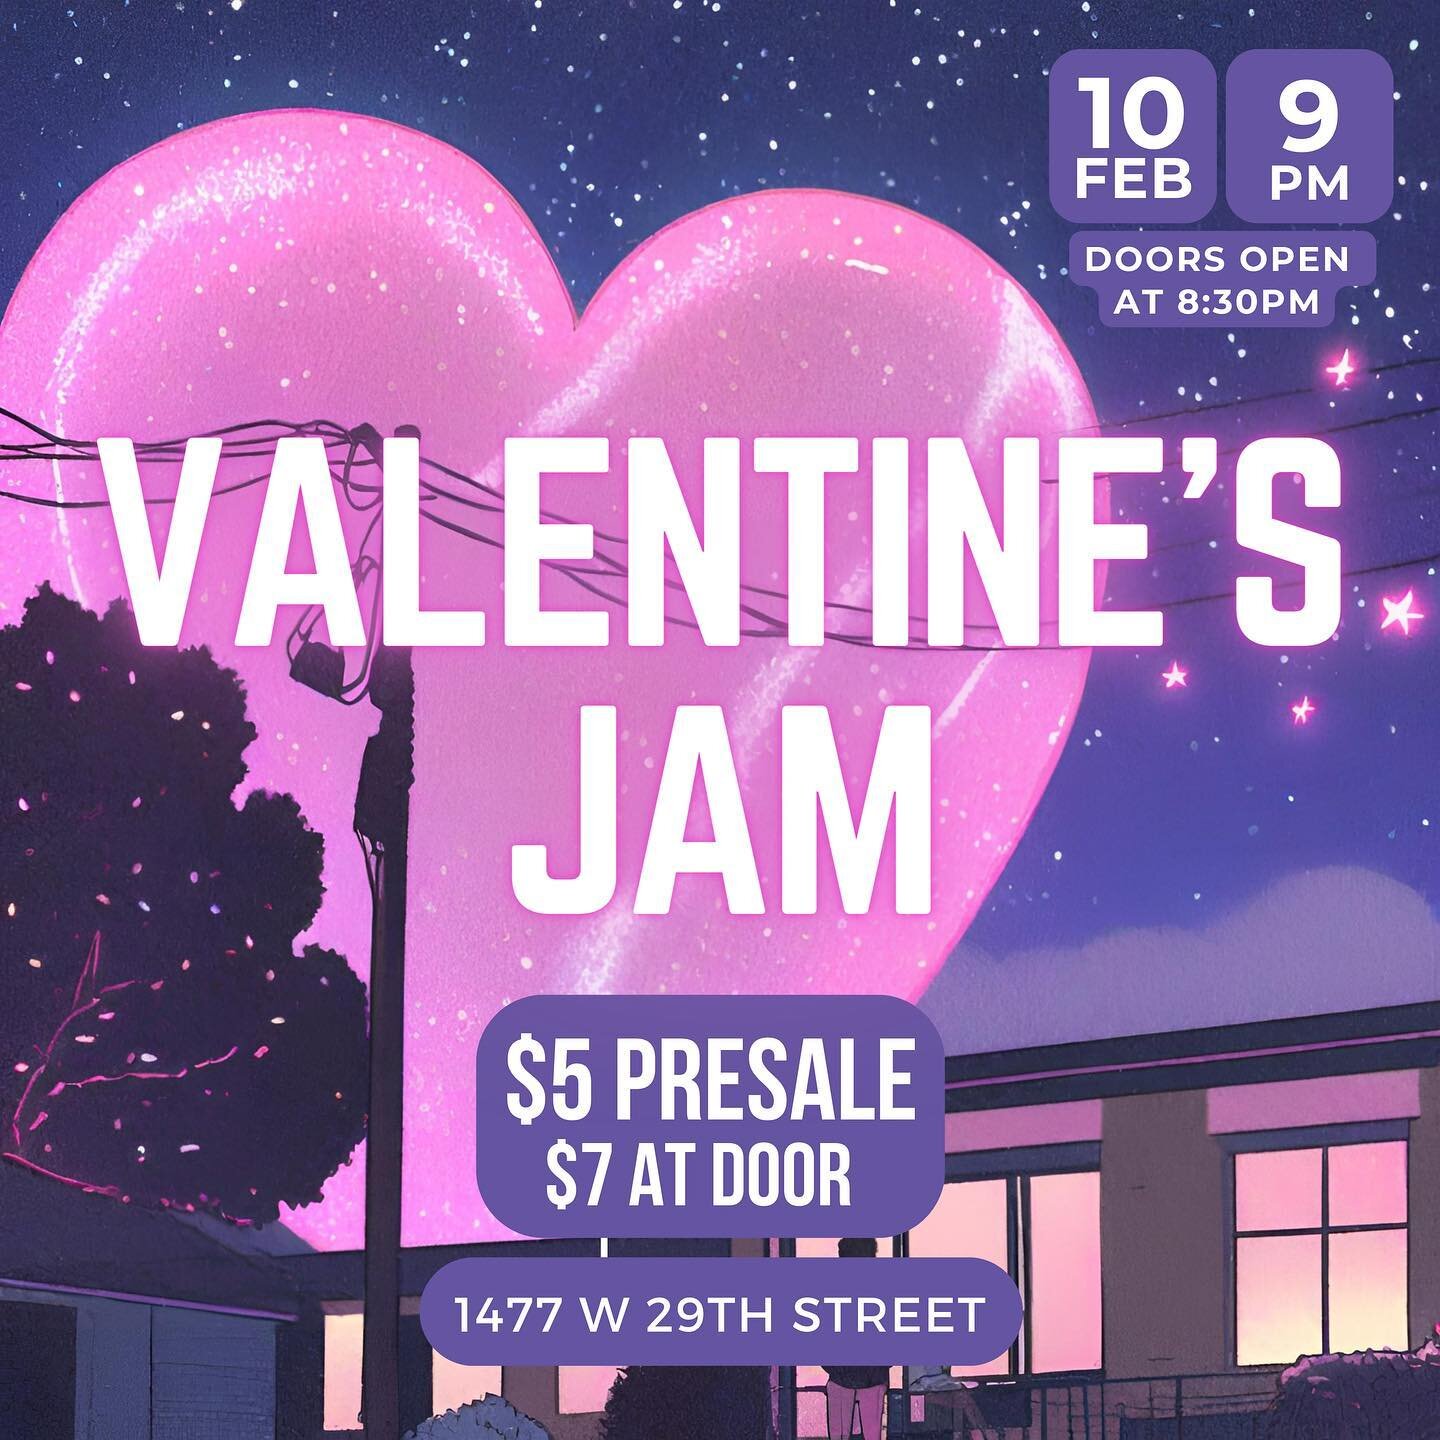 Join us this Saturday (February 10th) for Impulse&rsquo;s Valentine&rsquo;s Jam, featuring student performers Autumn Awbrey, Roy Gantz, KJ Odea, Hayley Brooke, Lionna The Band, Meghan Chen, and the USC Sirens! Doors open at 8:30, and the show starts 